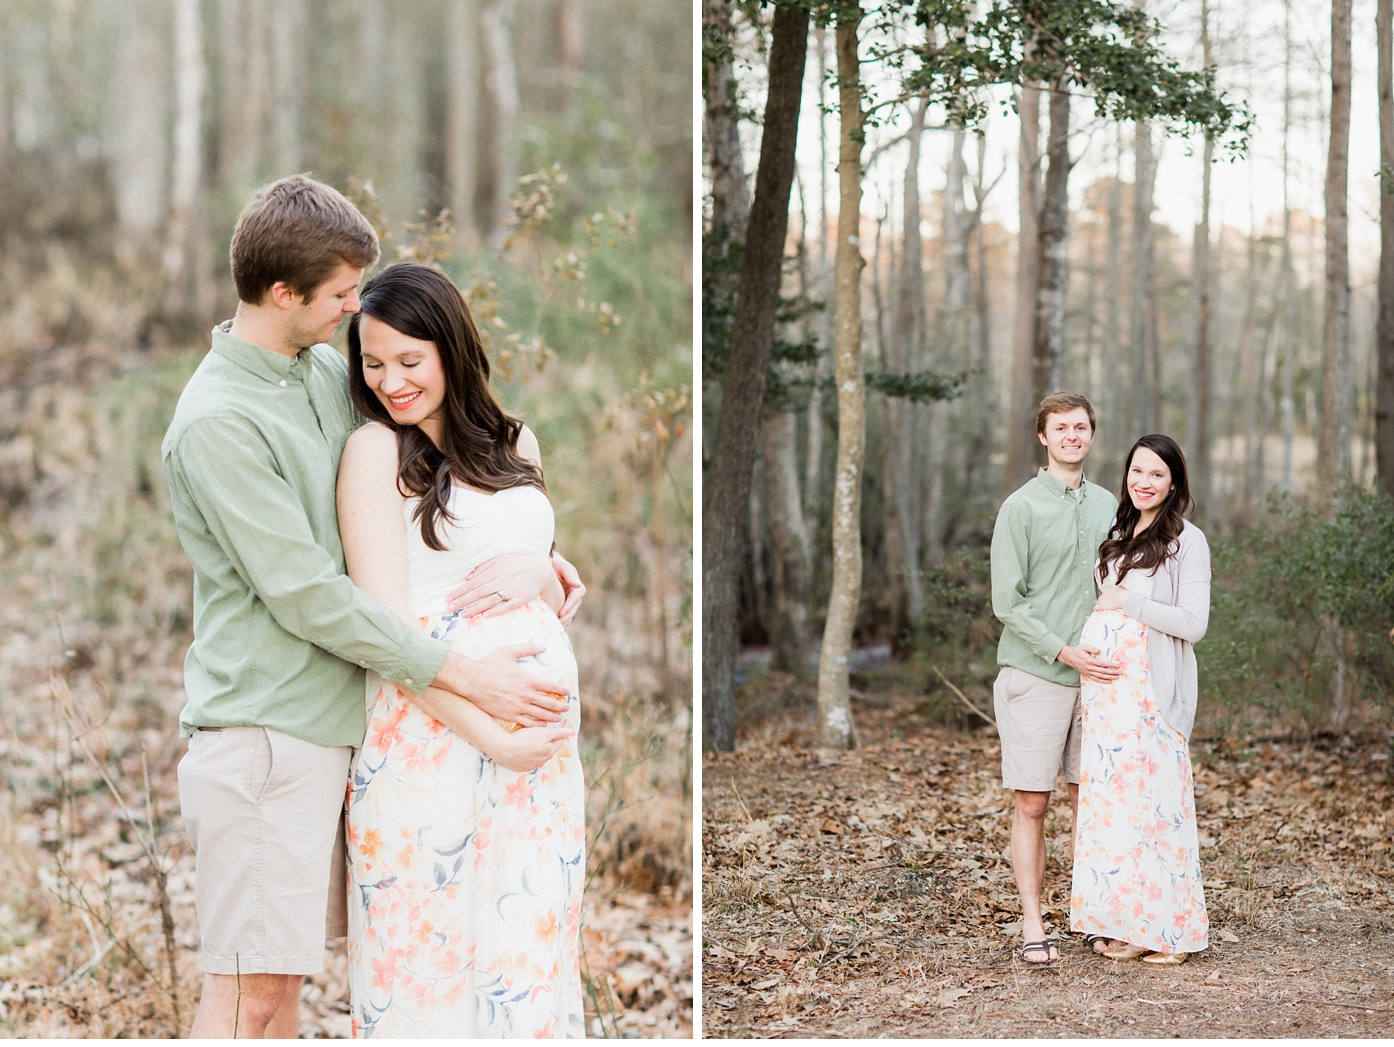 Spring Maternity Portrait and Family Session in Colonial Williamsburg by Alisandra Photography